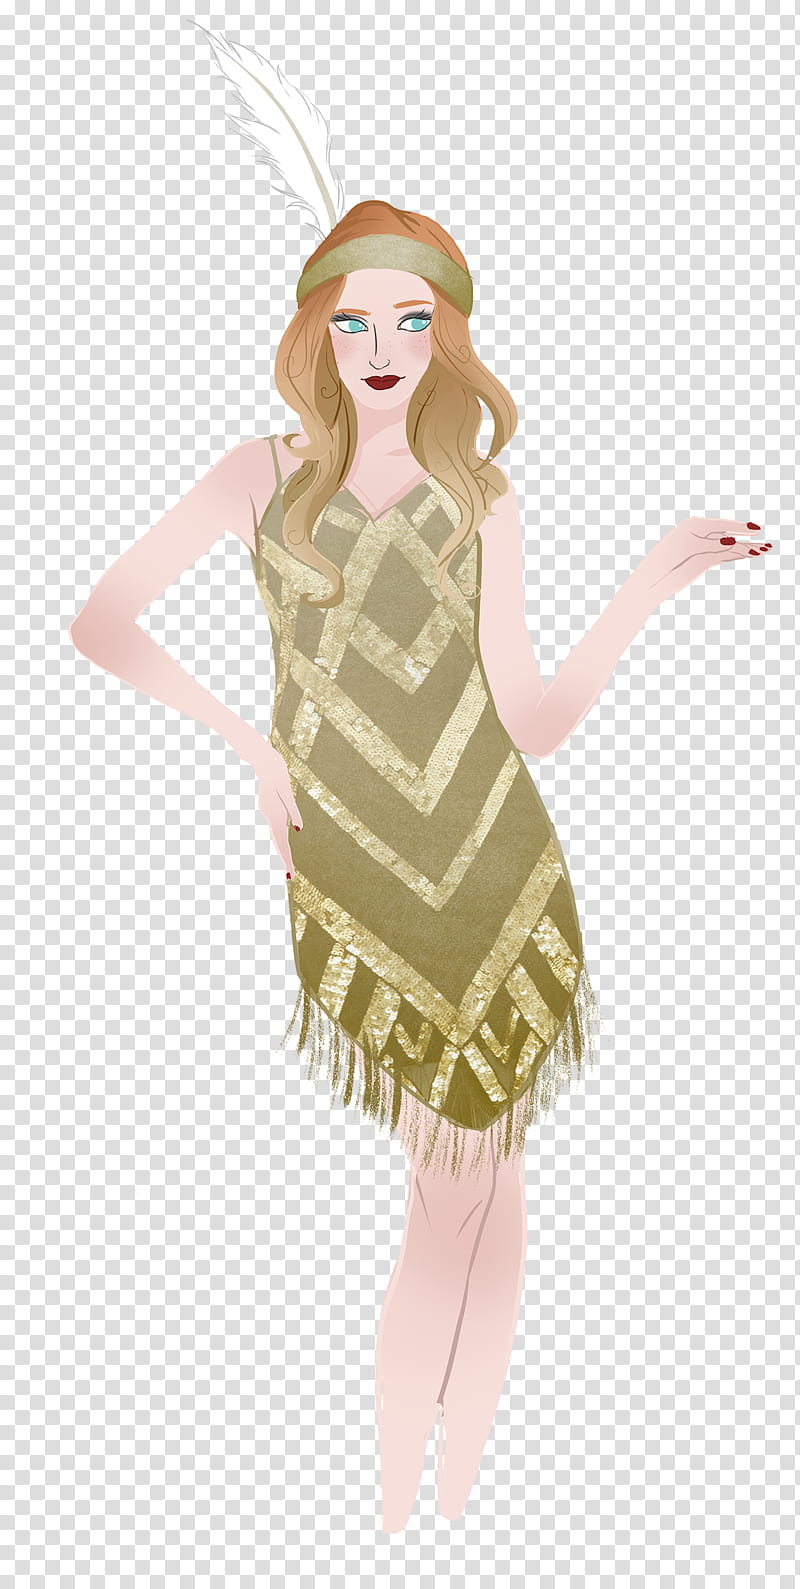 Girl, Costume, Flapper, Fashion, Woman, Drawing, Clothing, Pink transparent background PNG clipart